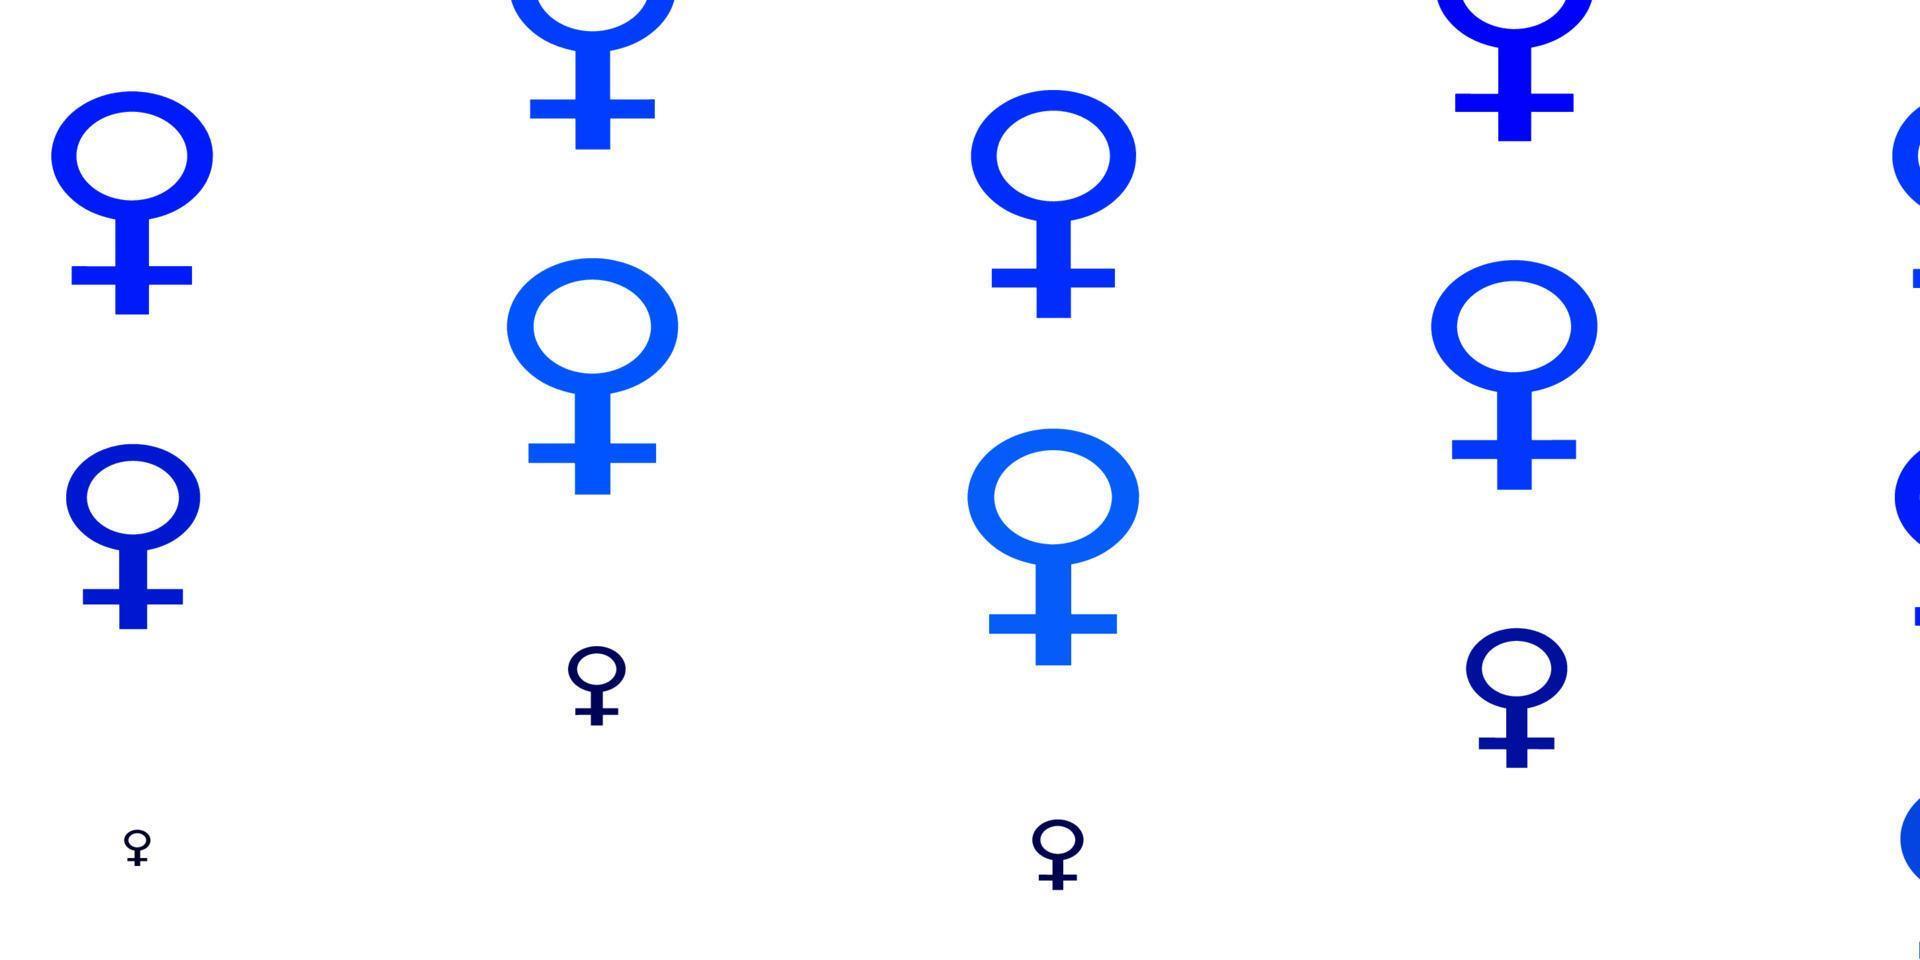 Light BLUE vector texture with women's rights symbols.